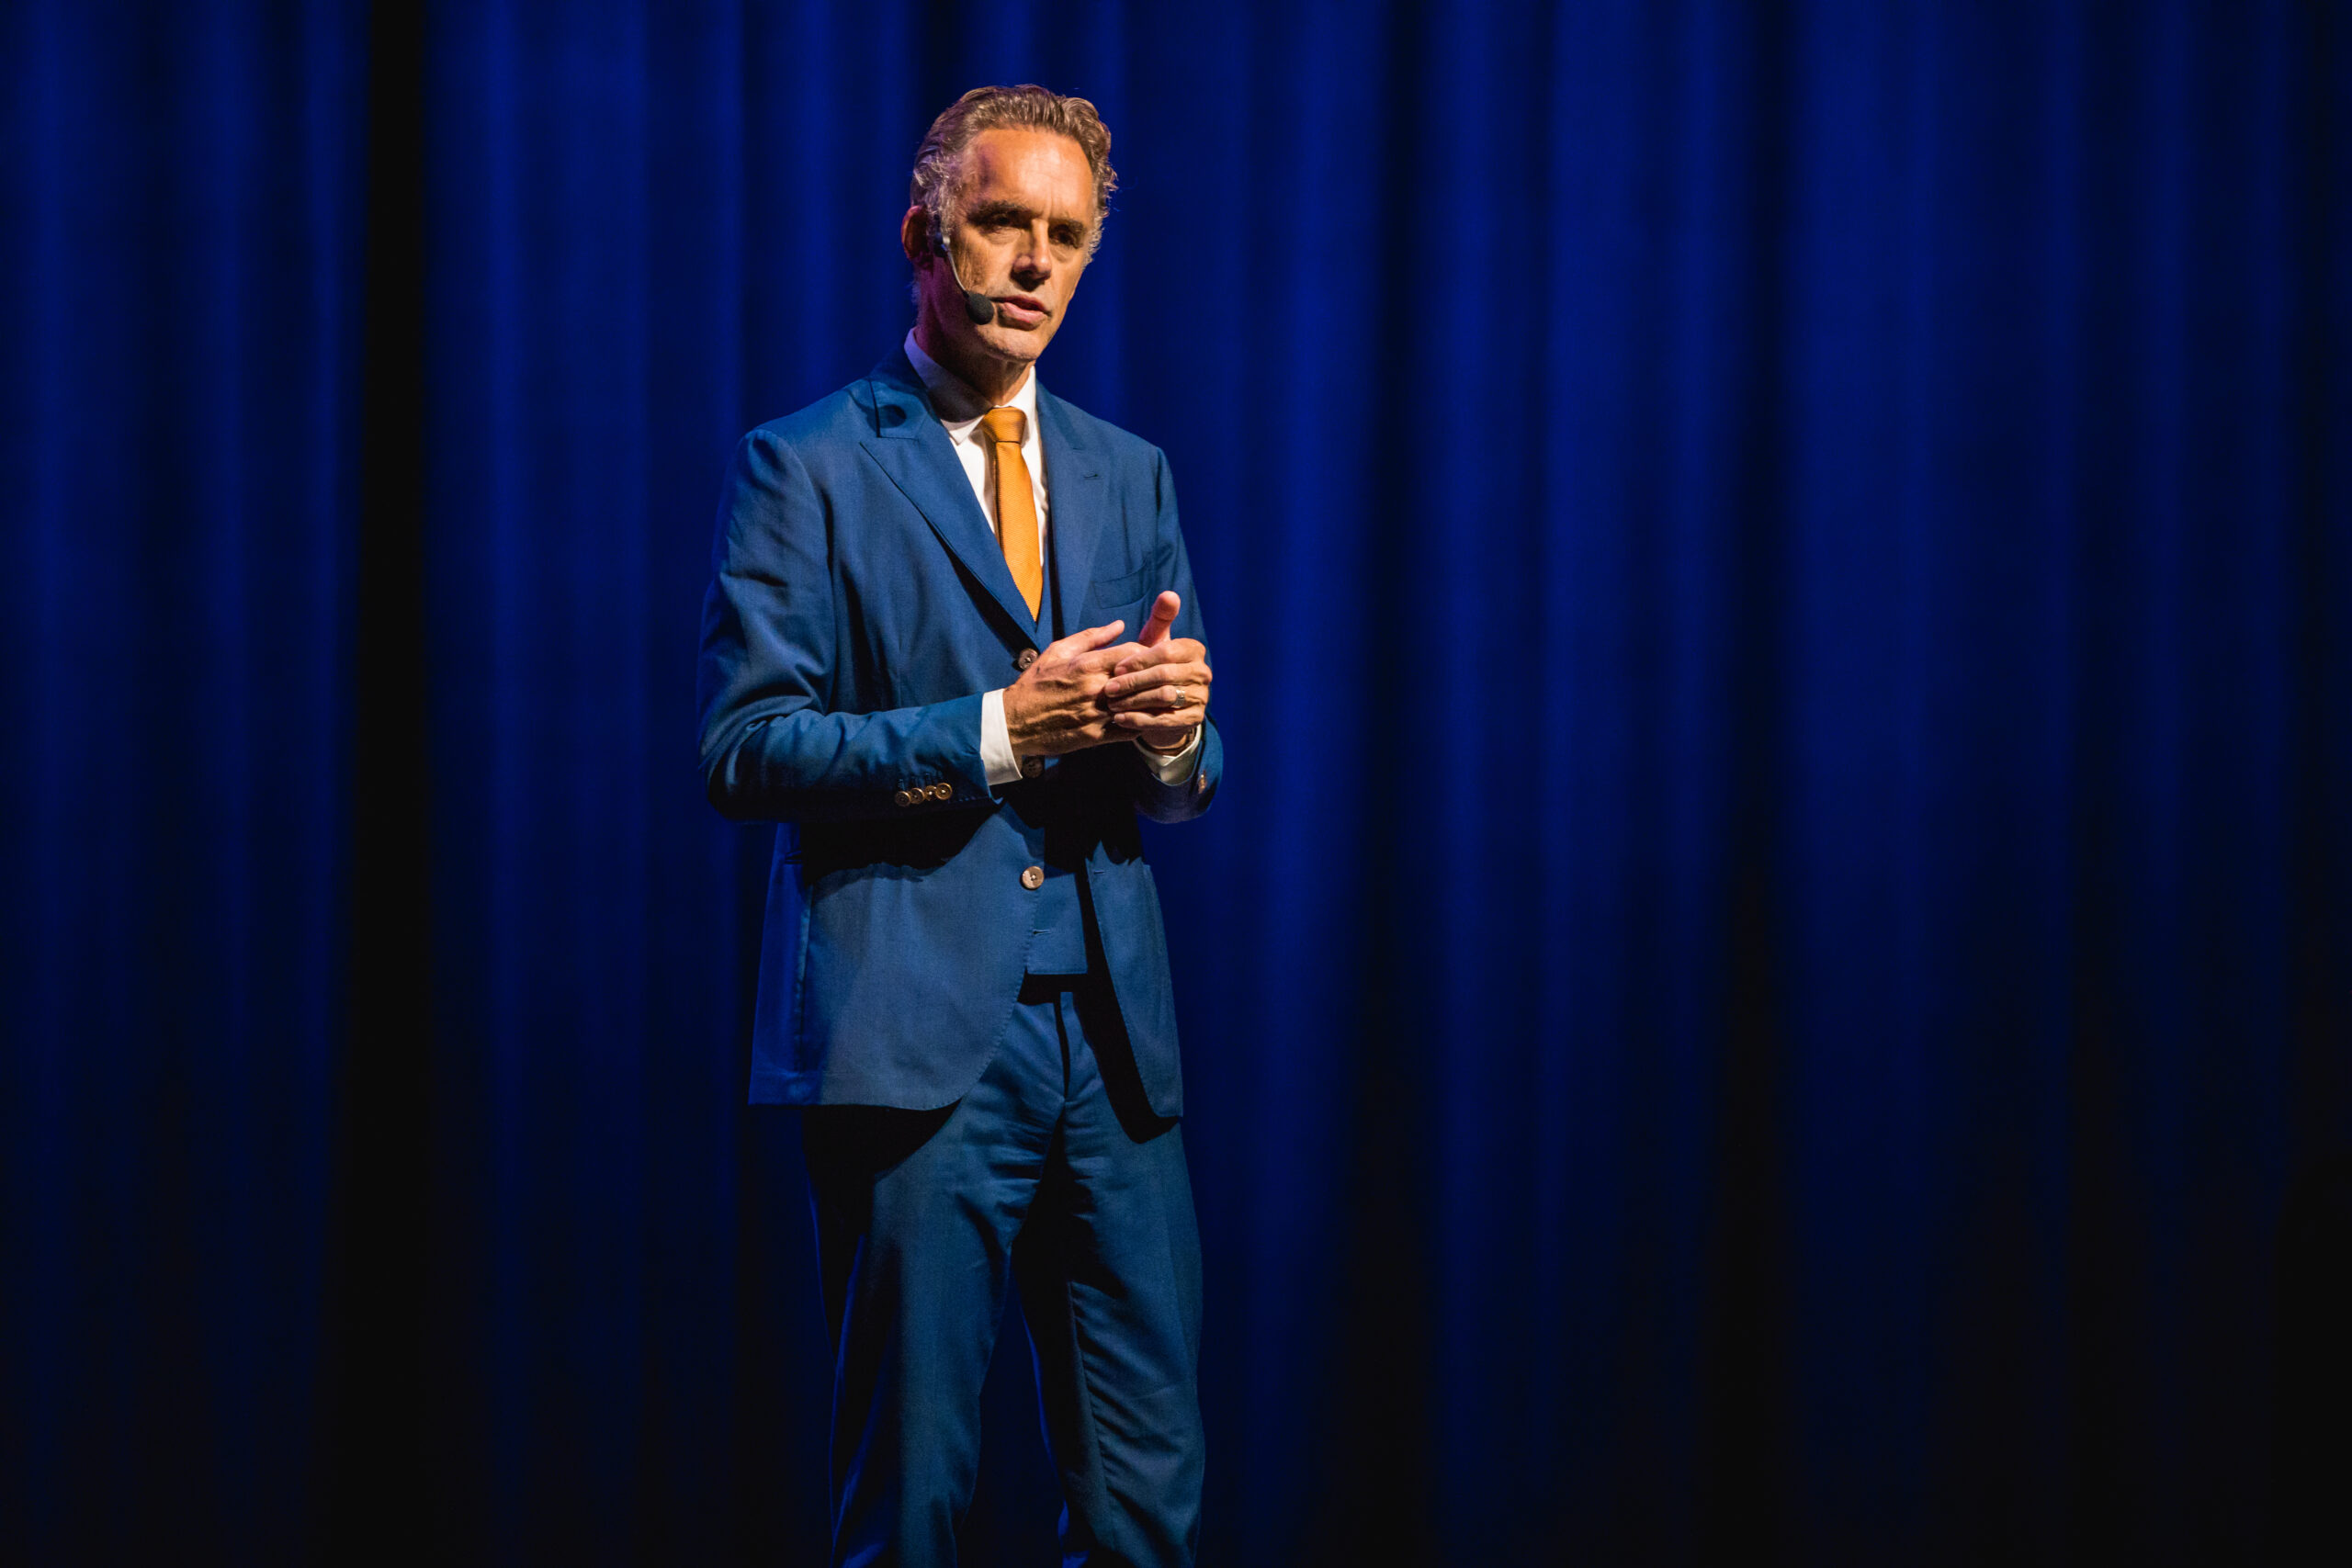 Jordan Peterson says free speech rights violated in court application